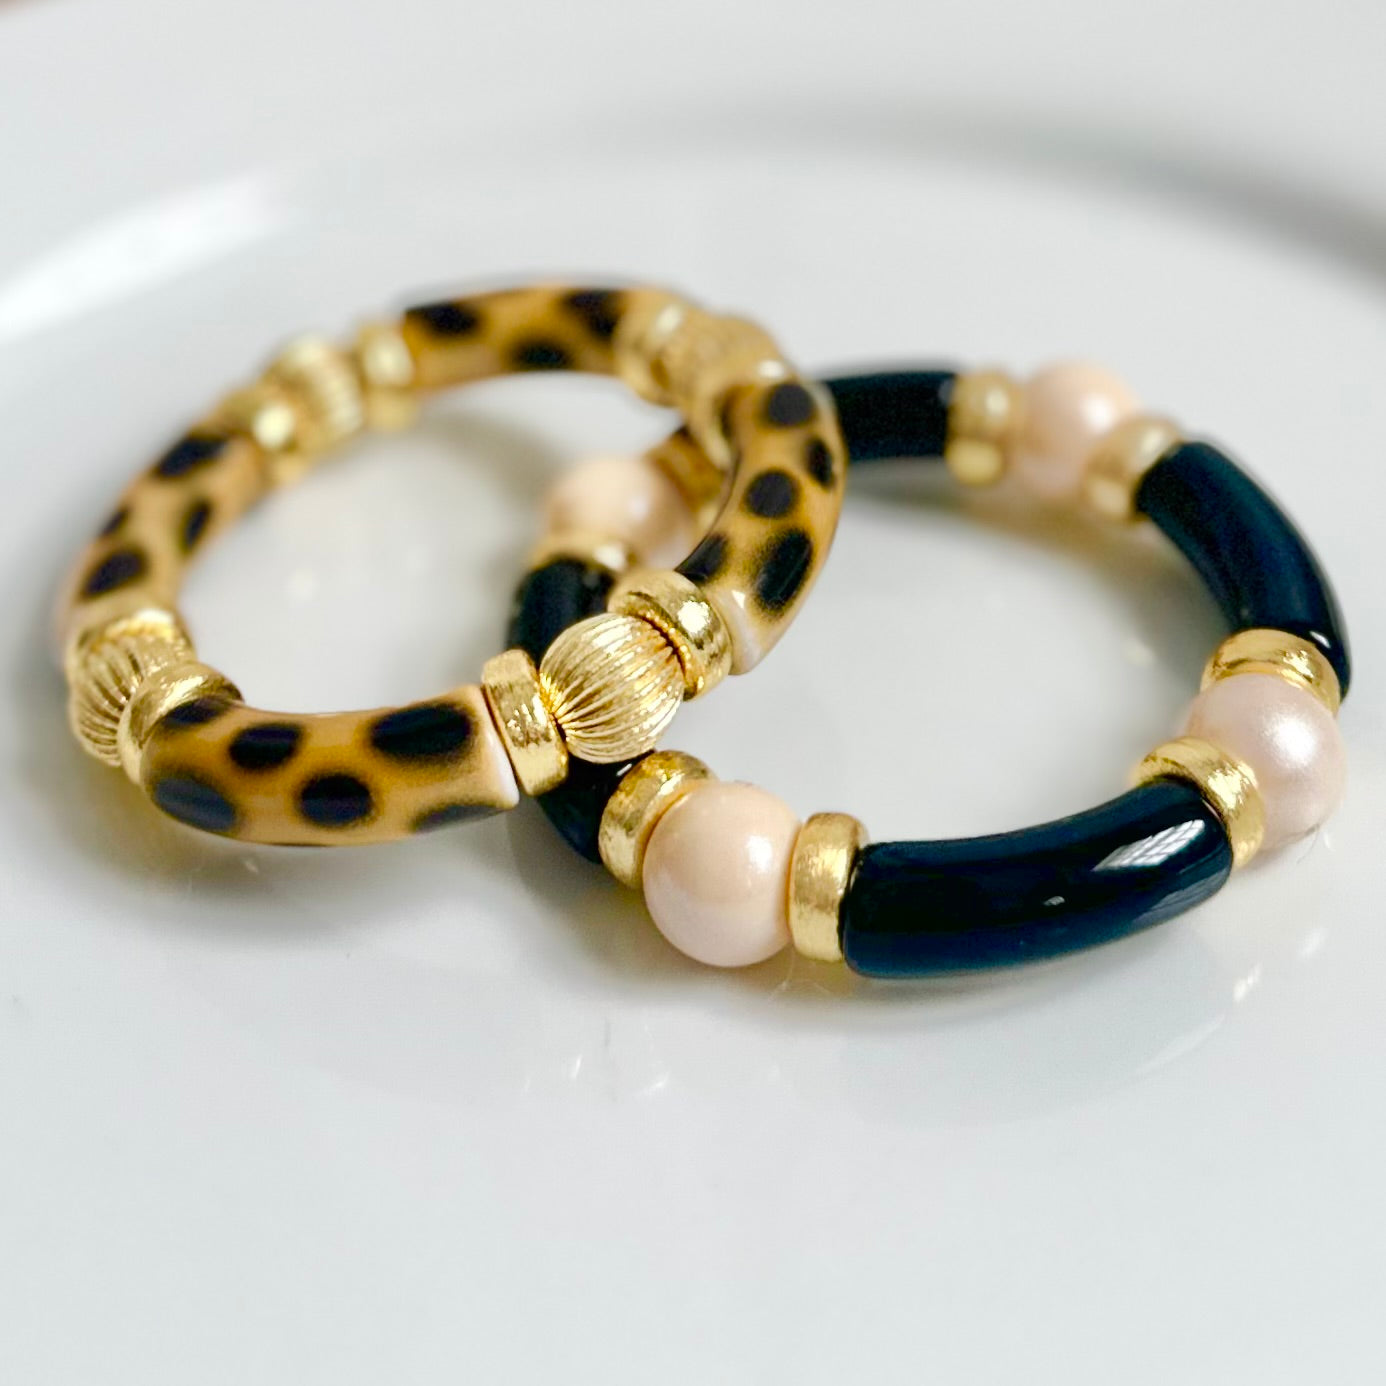 GIRAFFE LINK BRACELET WITH GOLD ACCENTS